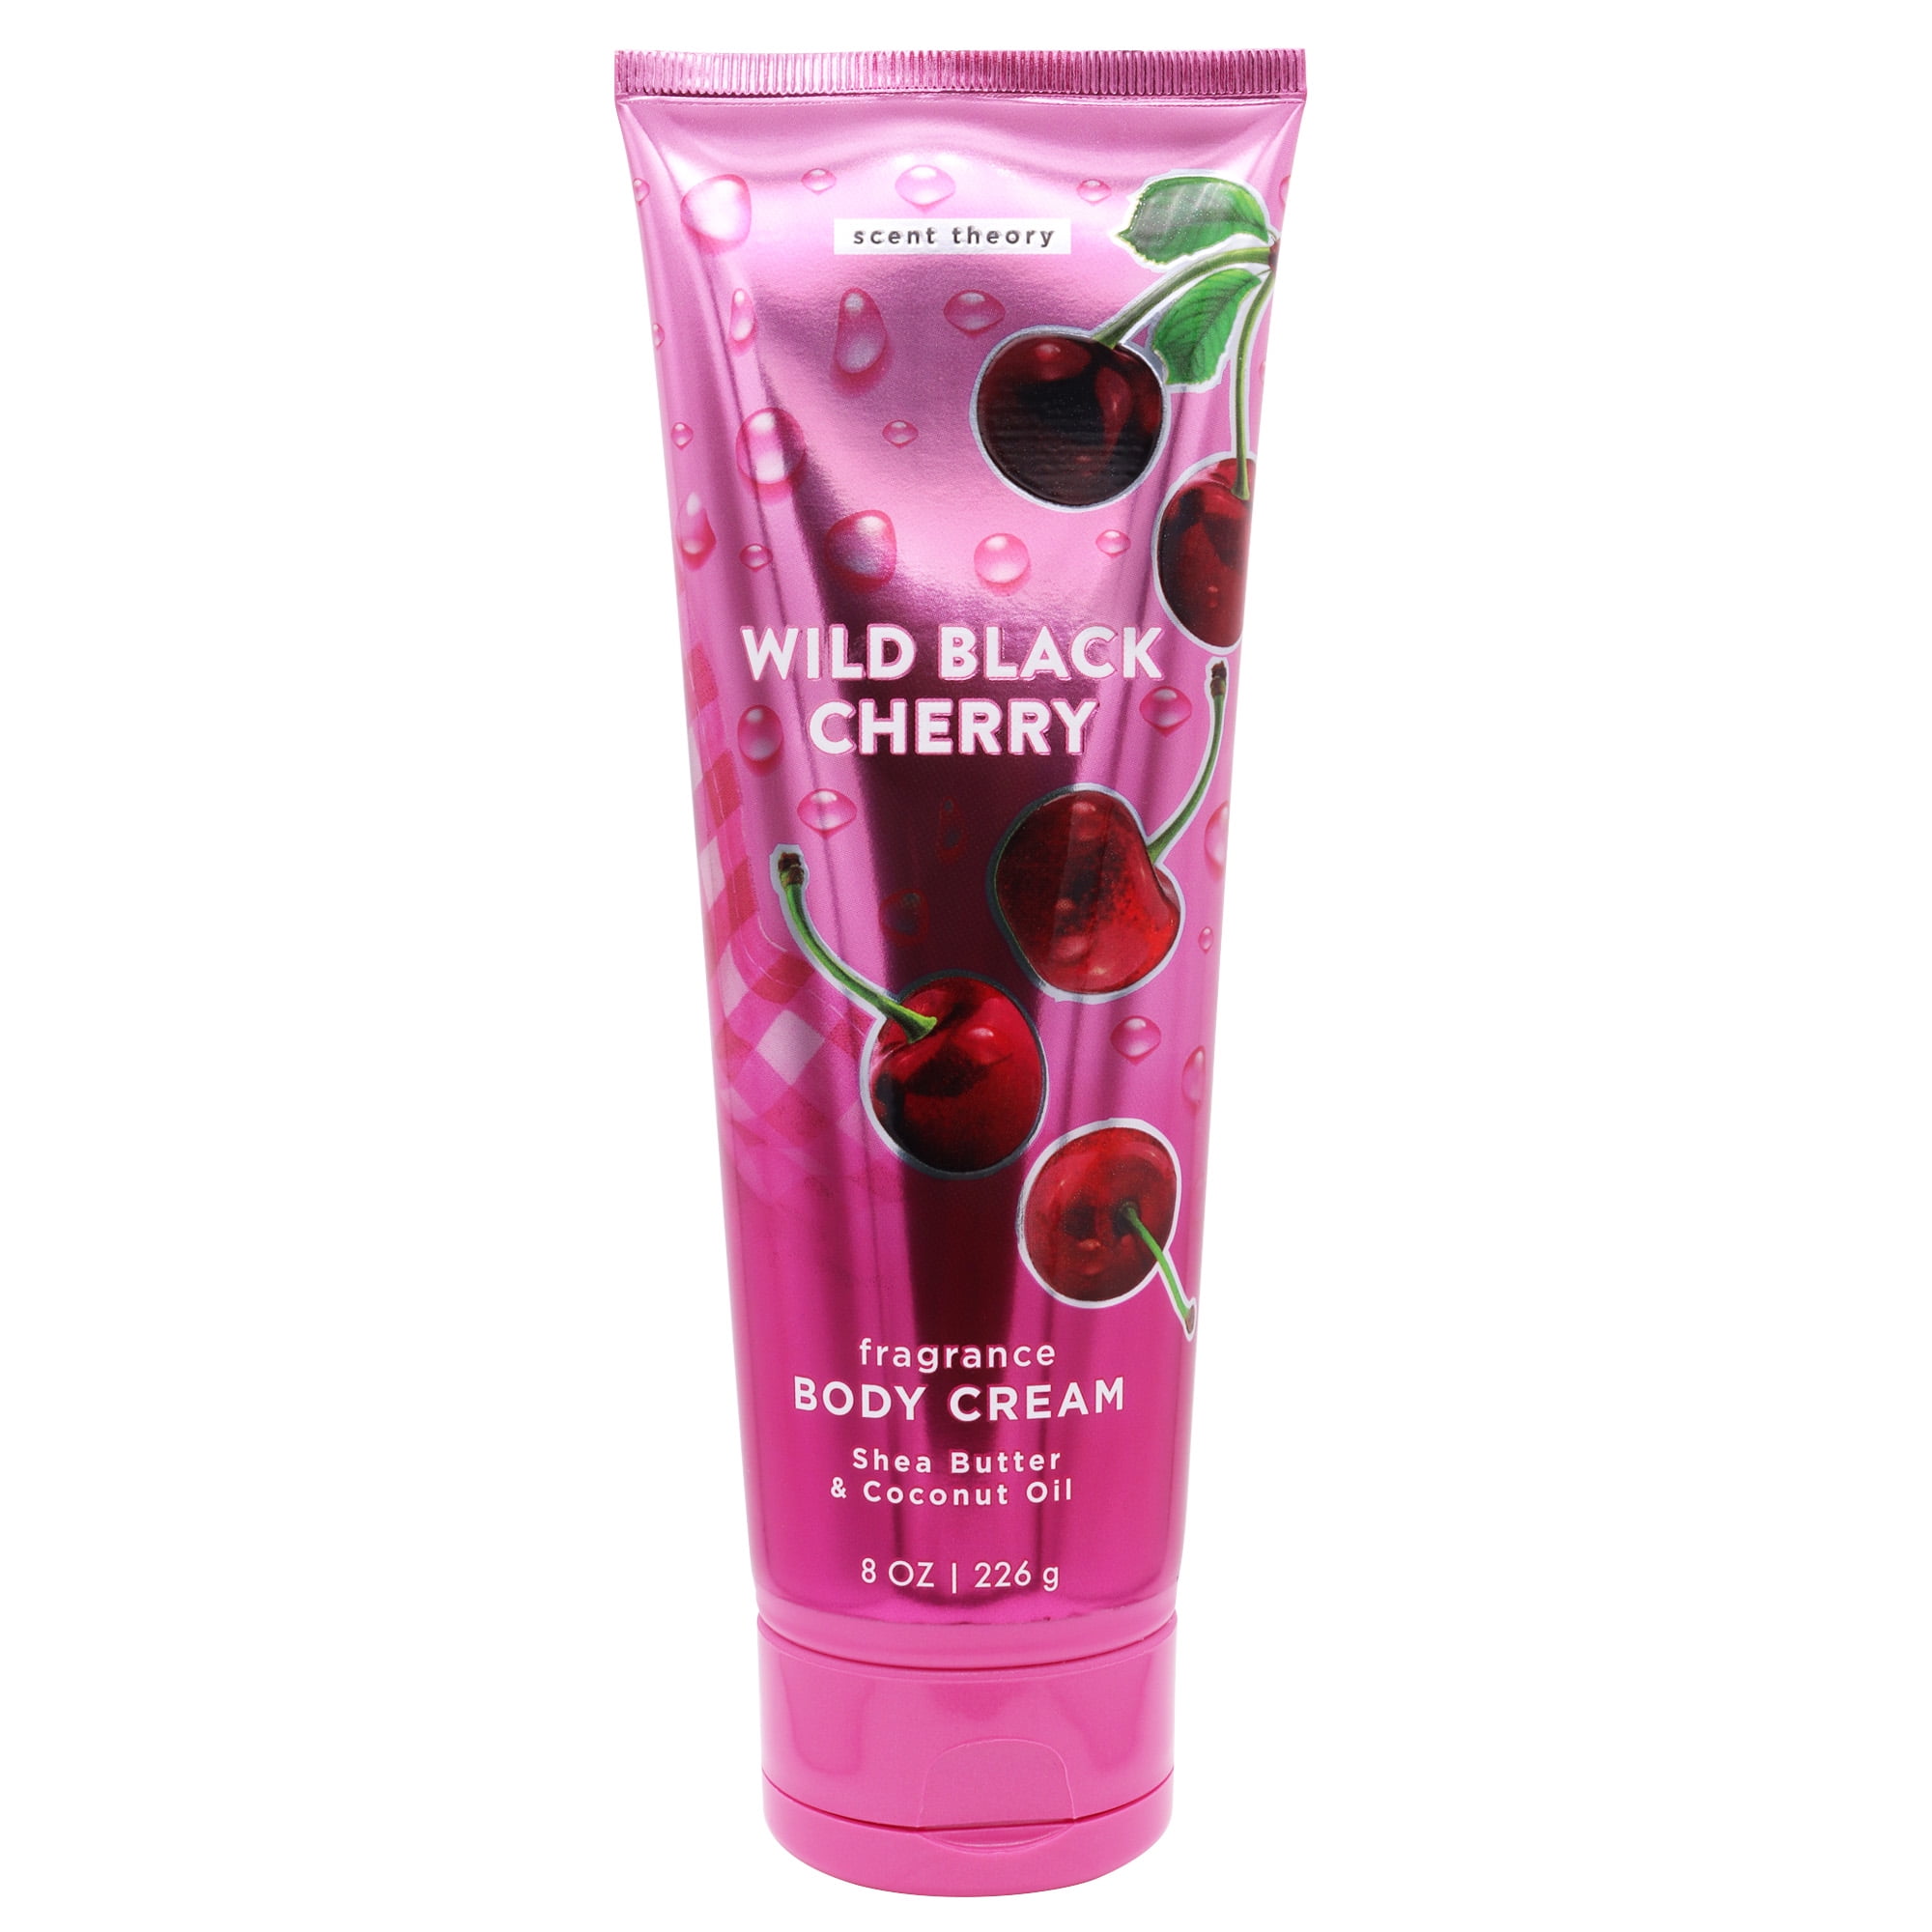 Scent Theory Lotion, Wild Black Cherry Hand and Body Cream with Shea Butter, 8 oz